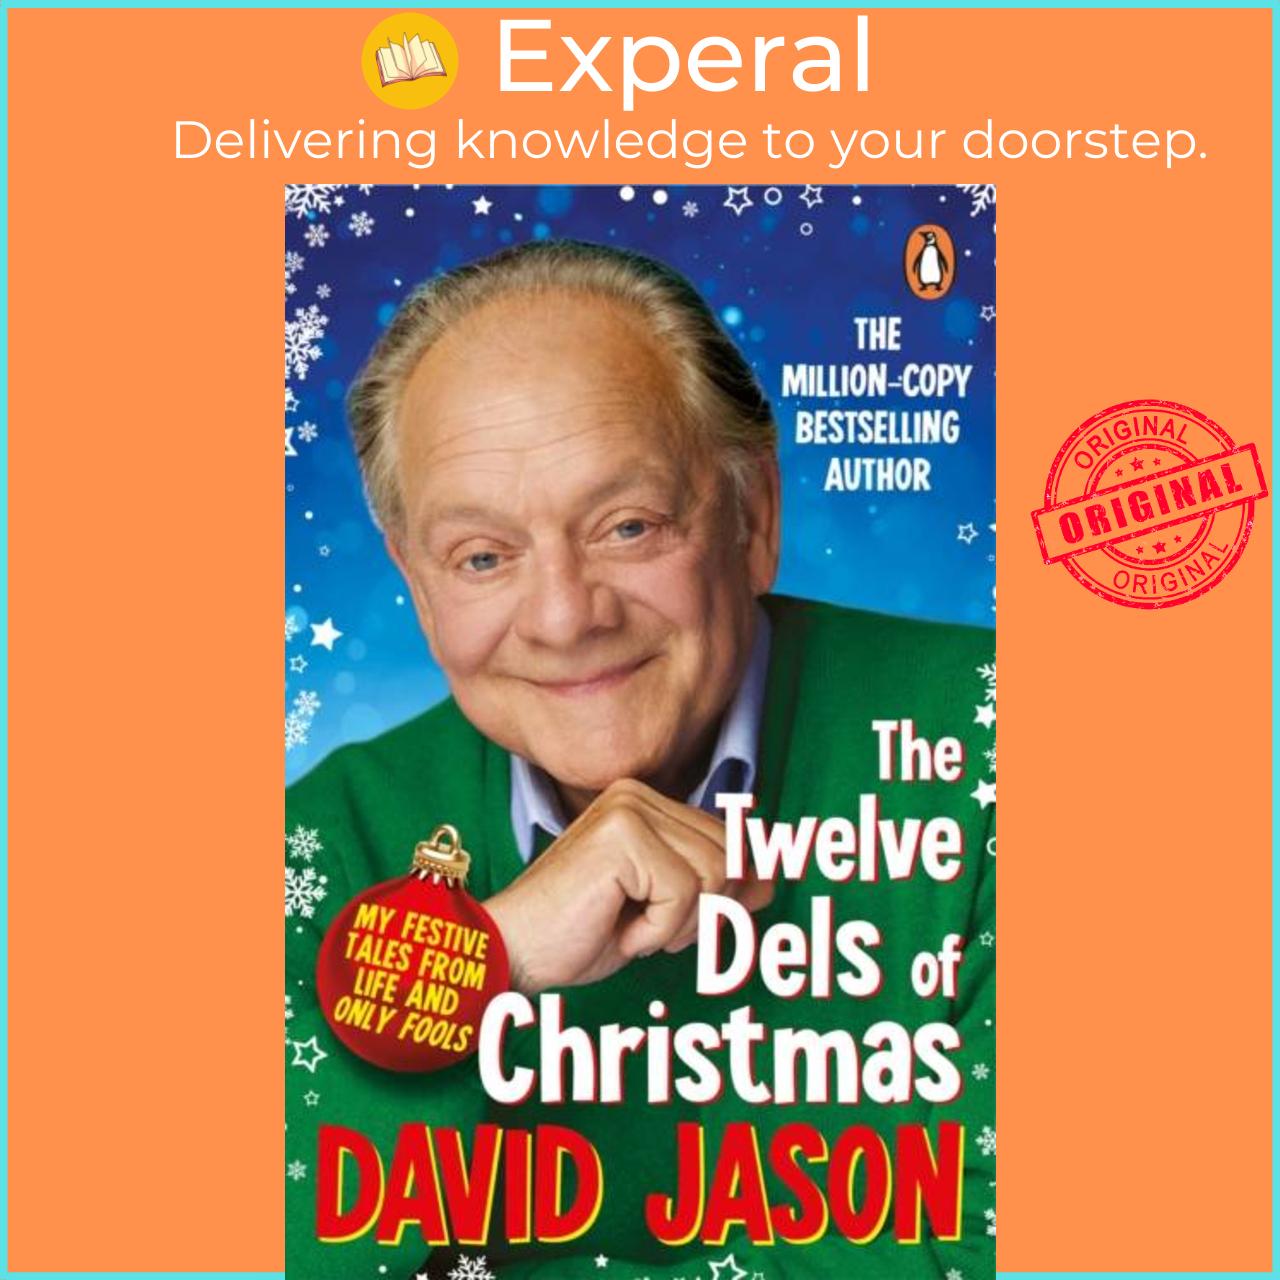 Hình ảnh Sách - The Twelve Dels of Christmas - My Festive Tales from Life and Only Fools by David Jason (UK edition, paperback)